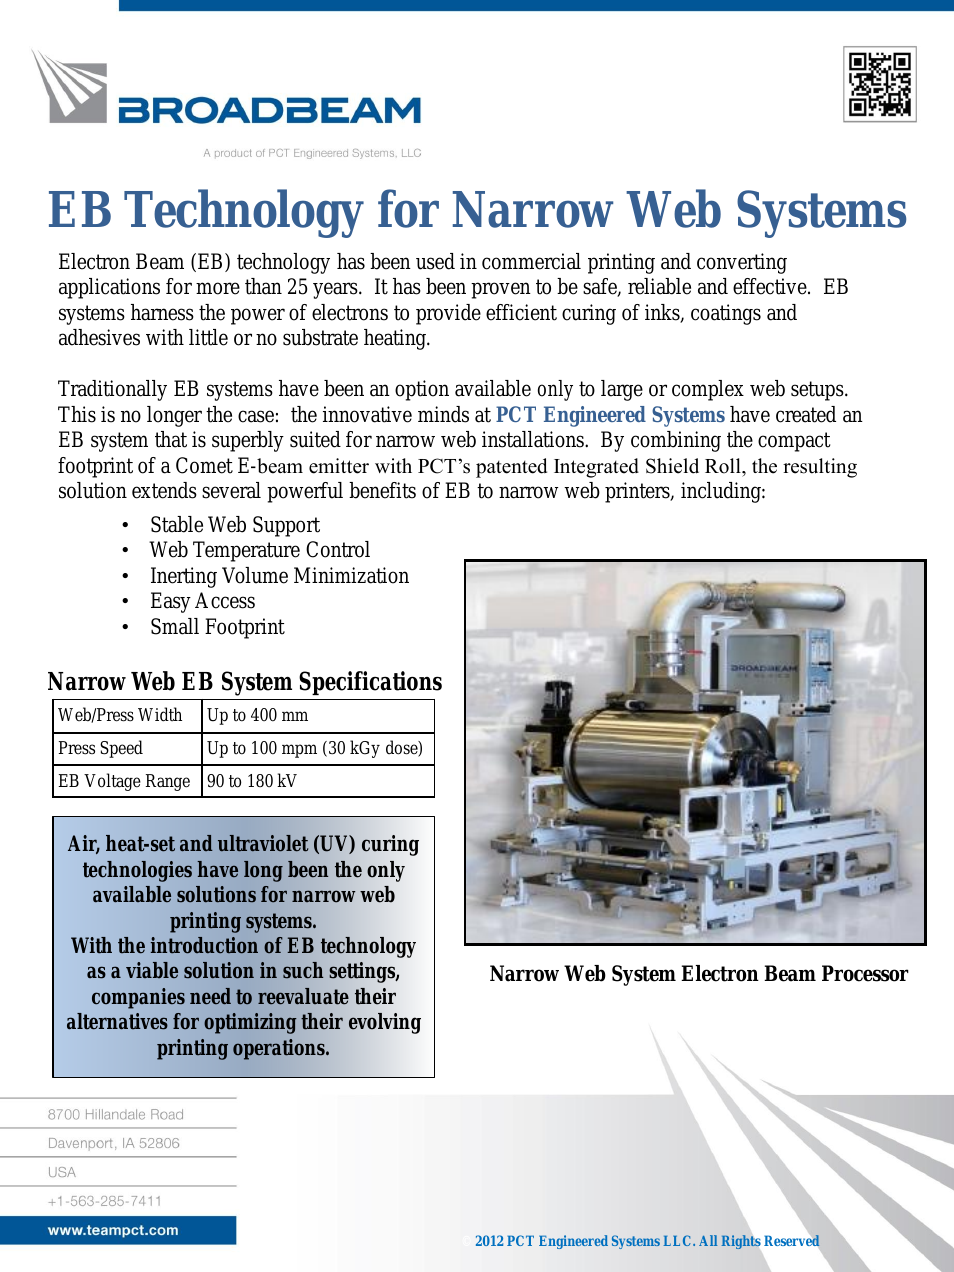 EB Technology for Narrow Web Systems